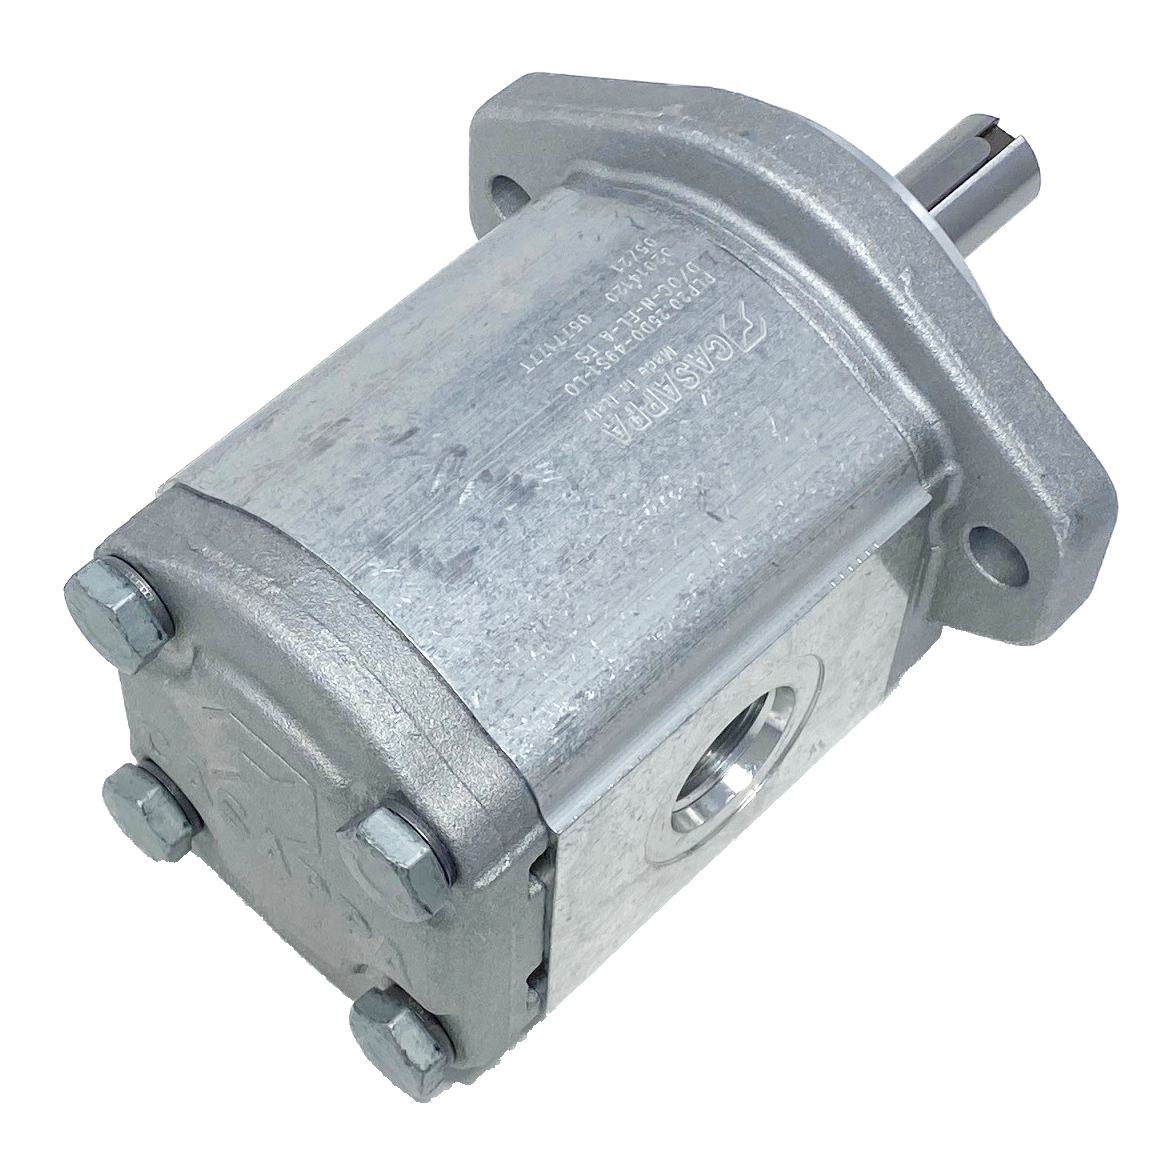 PHM20.31,5B0-49S9-LOC/OG-N-EL : Casappa Polaris Gear Motor, 33.03cc, 2900psi Rated, 2500RPM, Reversible Interior Drain, 3/4" Bore x 3/16" Key Shaft, SAE A 2-Bolt Flange, 0.625 (5/8") #10 SAE Inlet, 1.25" #20 SAE Outlet, Cast Iron Body, Aluminum Flange